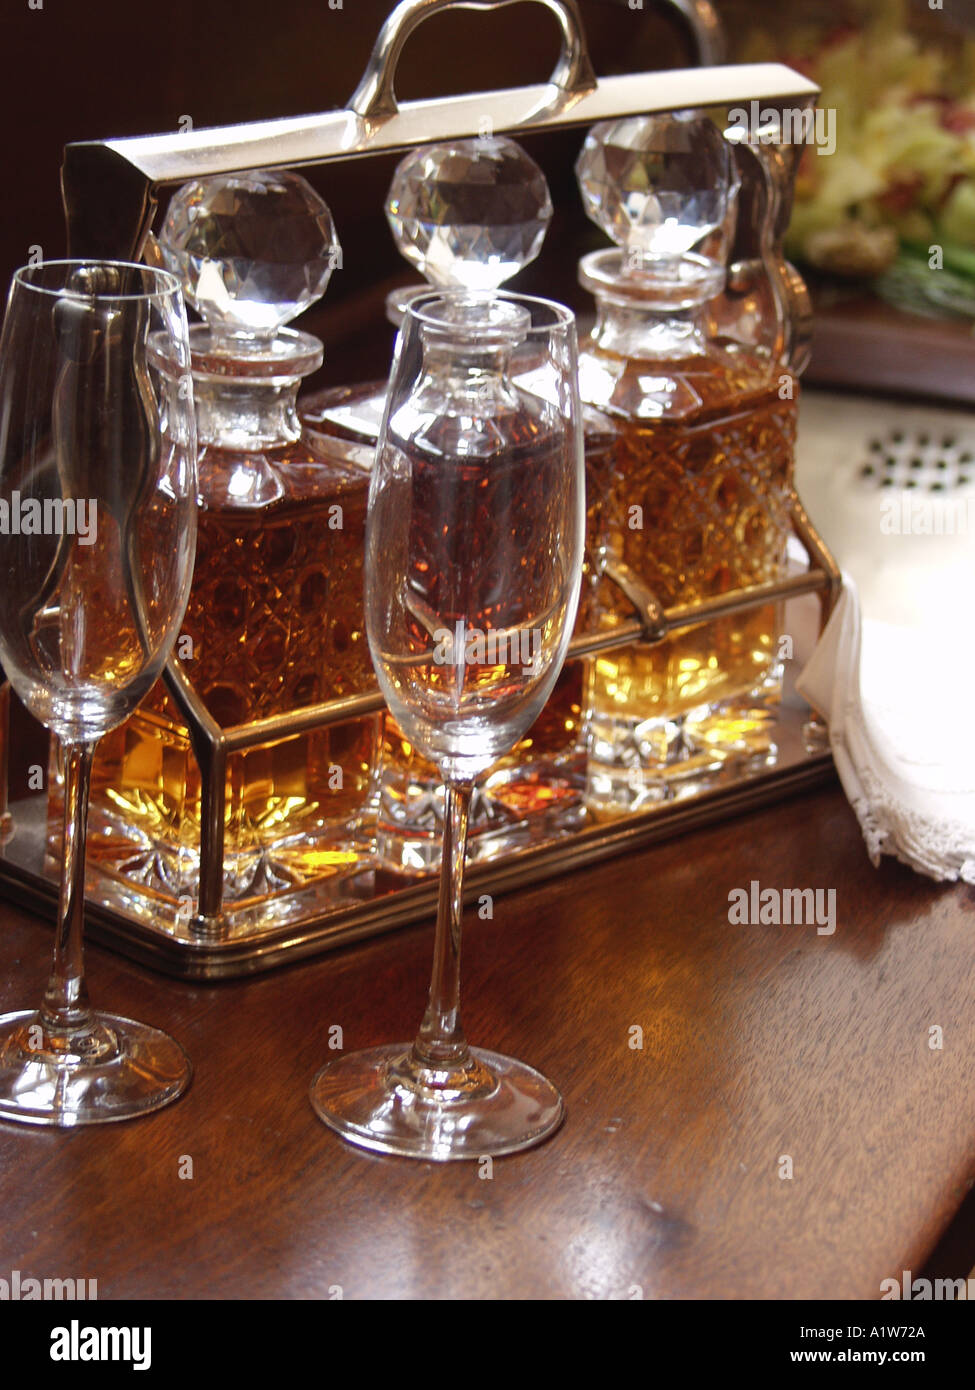 crystal decanters with liquor sitting on wood counter top Stock Photo